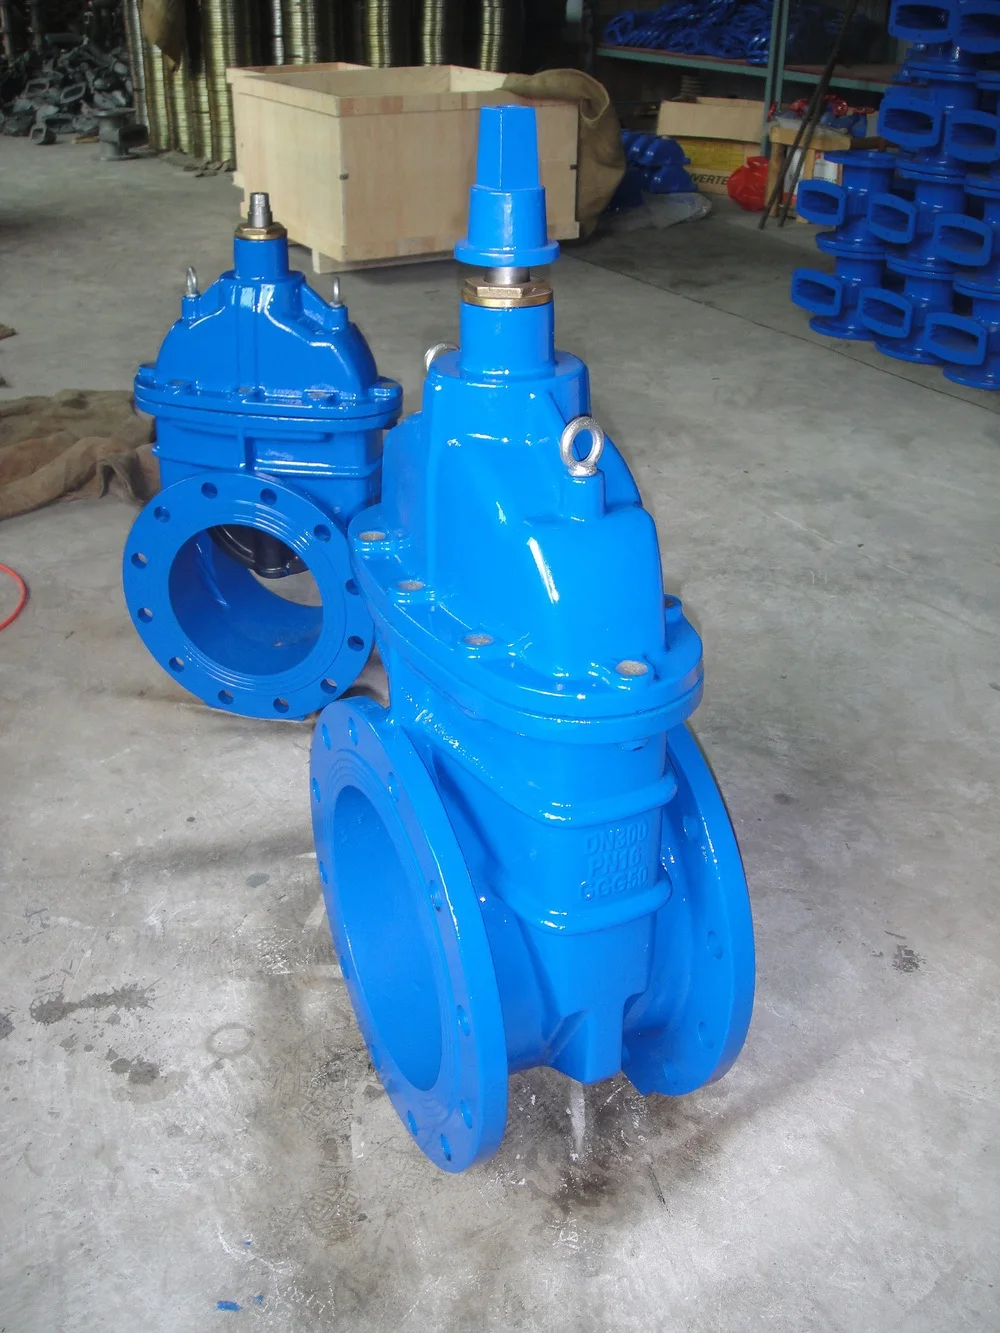 Resilient Seat Non Rising Stem 12 inch Gate valve PN10, View 12 inch